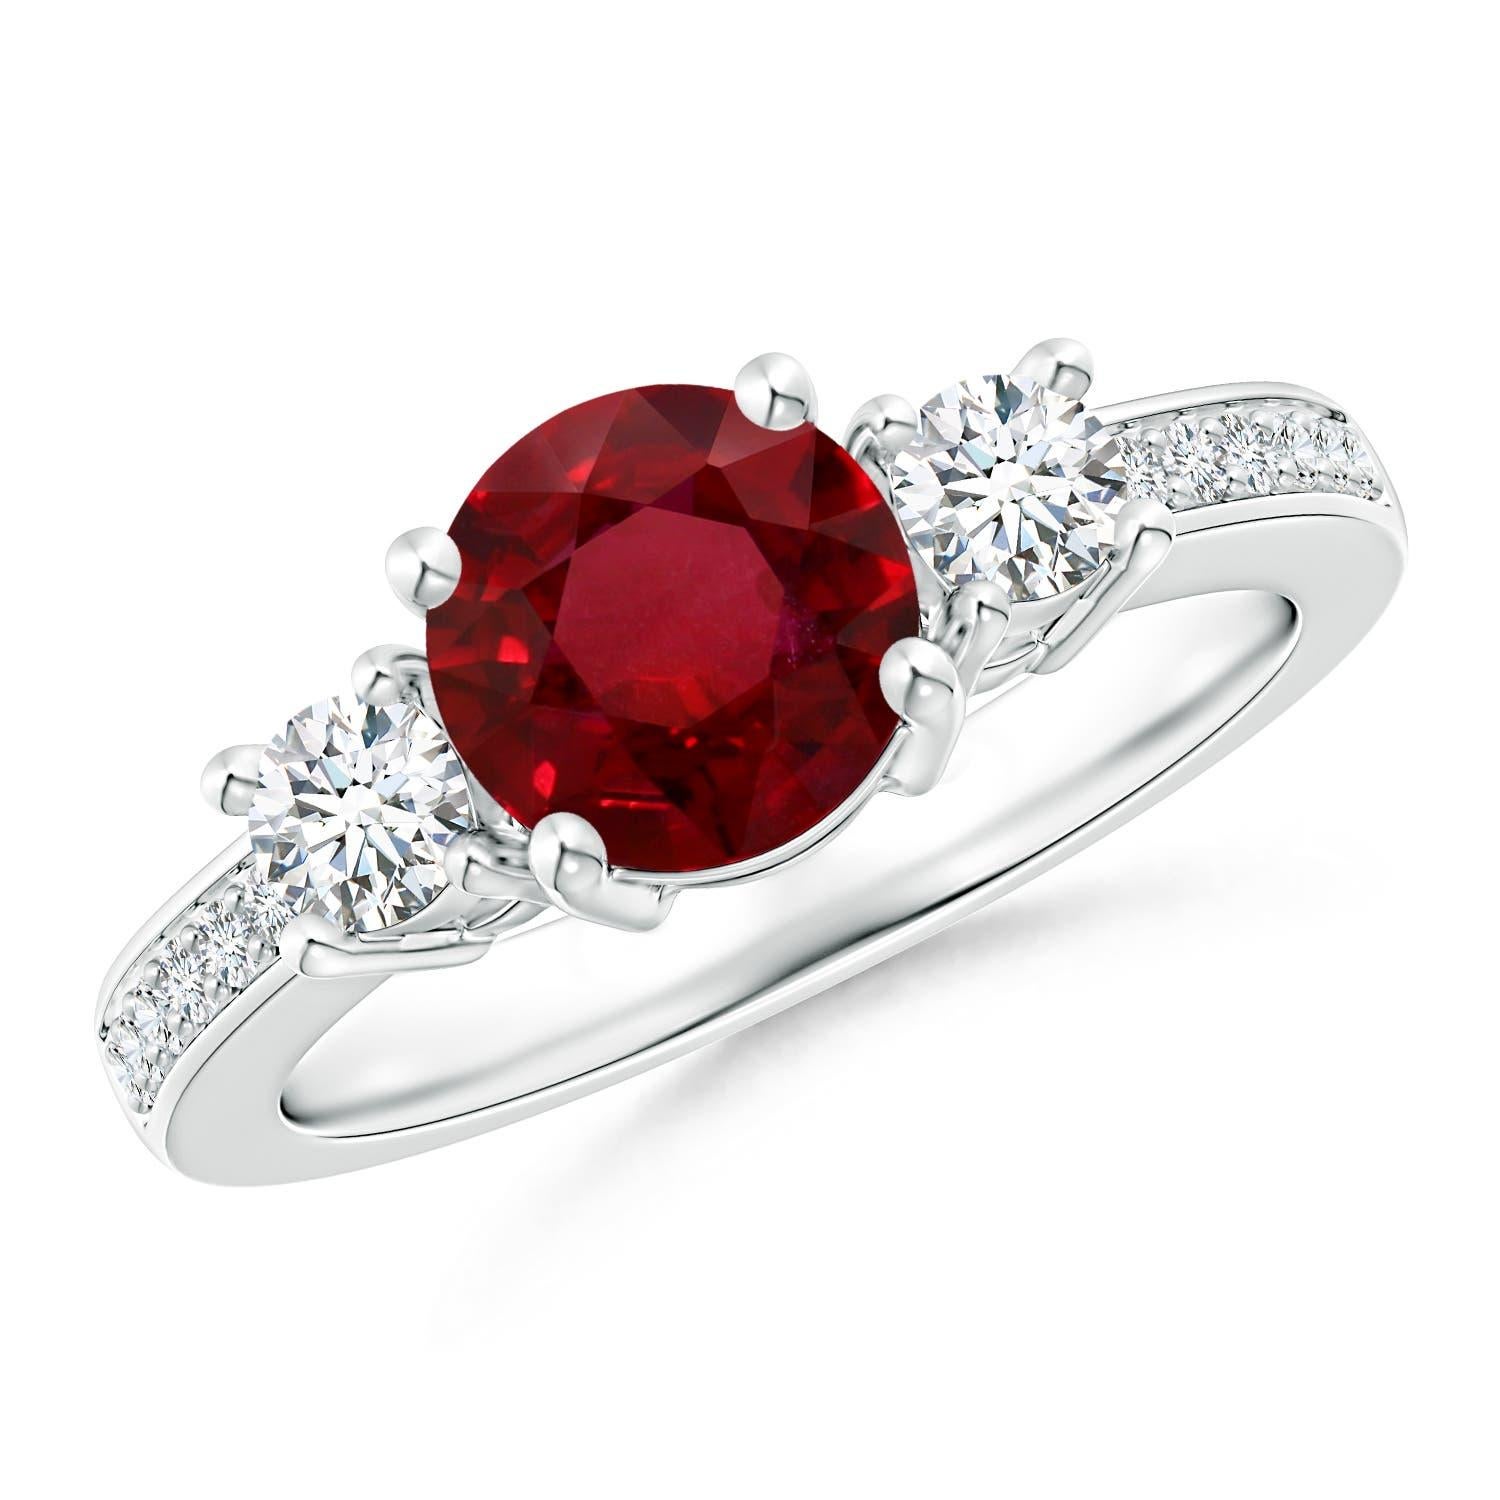 For Sale:  GIA Certified Natural Classic Ruby and Diamond Ring in White Gold